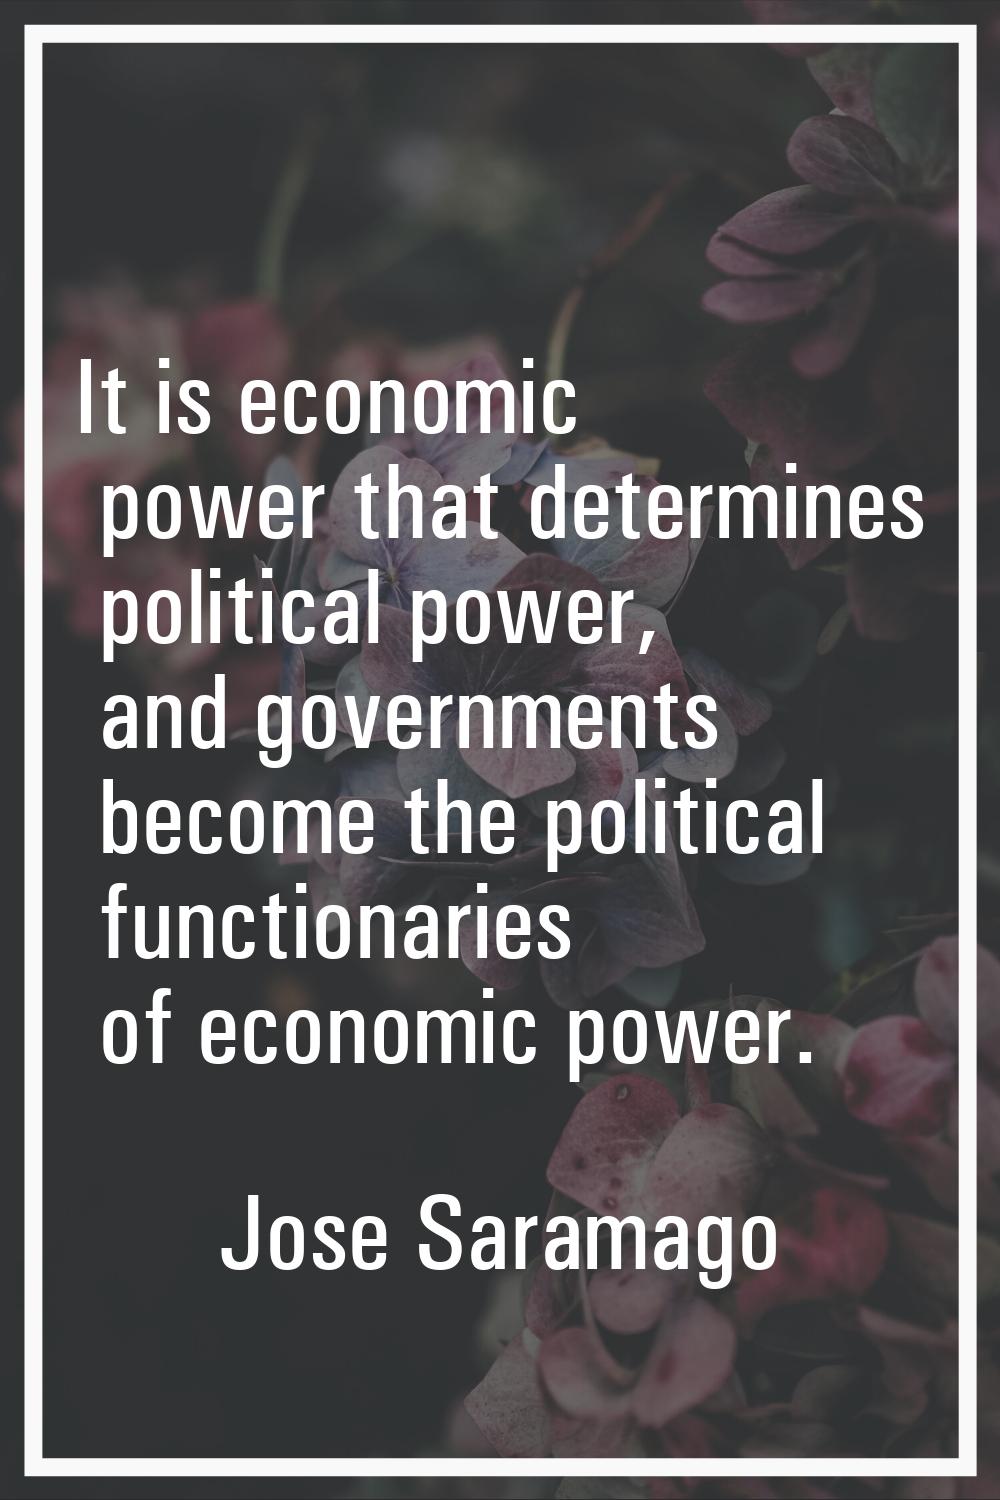 It is economic power that determines political power, and governments become the political function